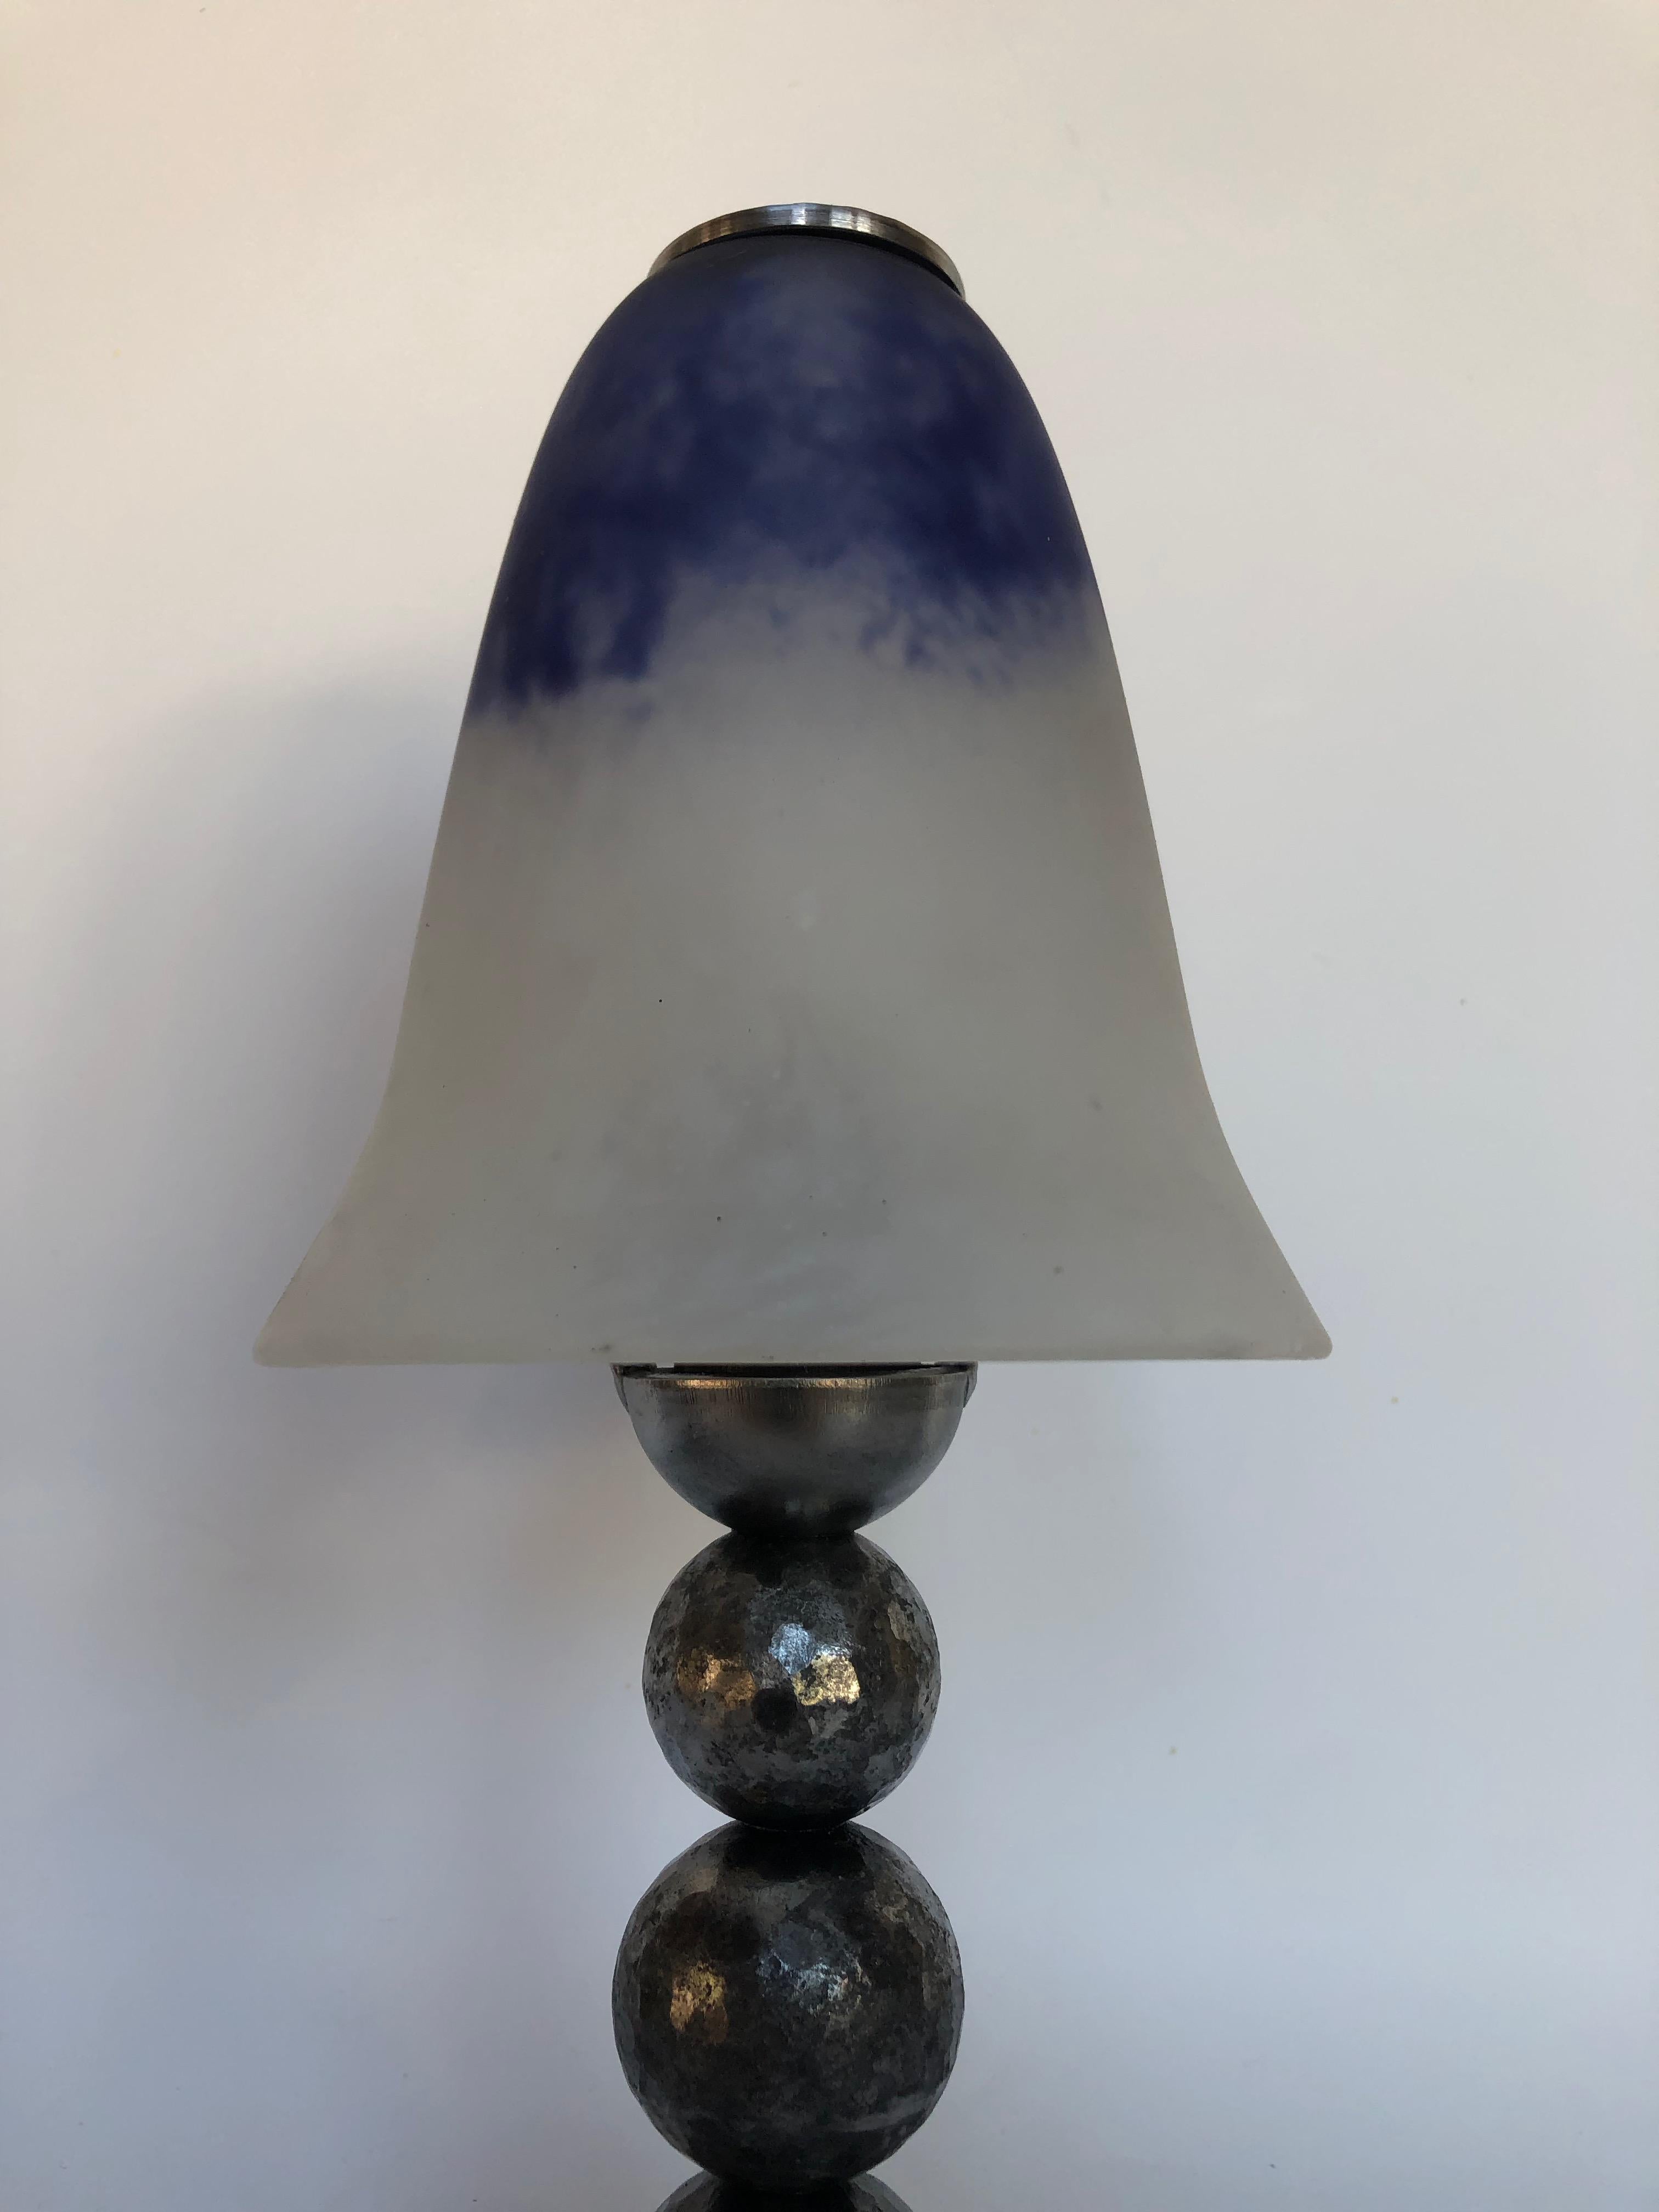 Lamp circa 1930 in wrought iron in the style of Edgar Brandt.
Glass paste tulip signed Daum NANCY.
This lamp is electrified is in perfect condition.

Diameter: base 9 cm
Height: 29cm
Weight: 2 Kg

Daum (French establishment created in 1878)